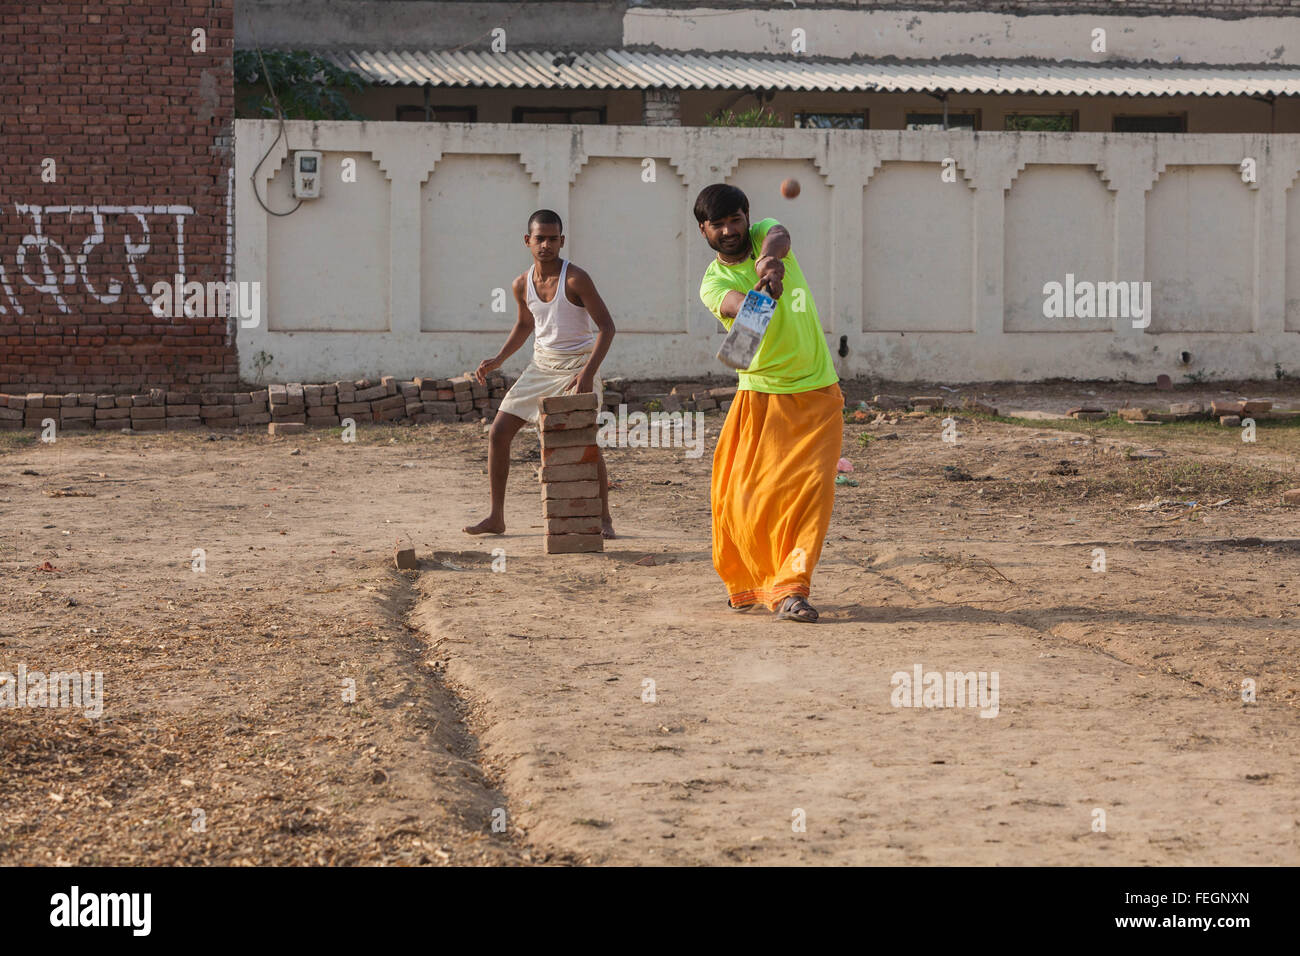 Hariom Sharma, who was taken as a orphan in an Ashram in Agra, India is batting in a makeshift game of cricket. Stock Photo